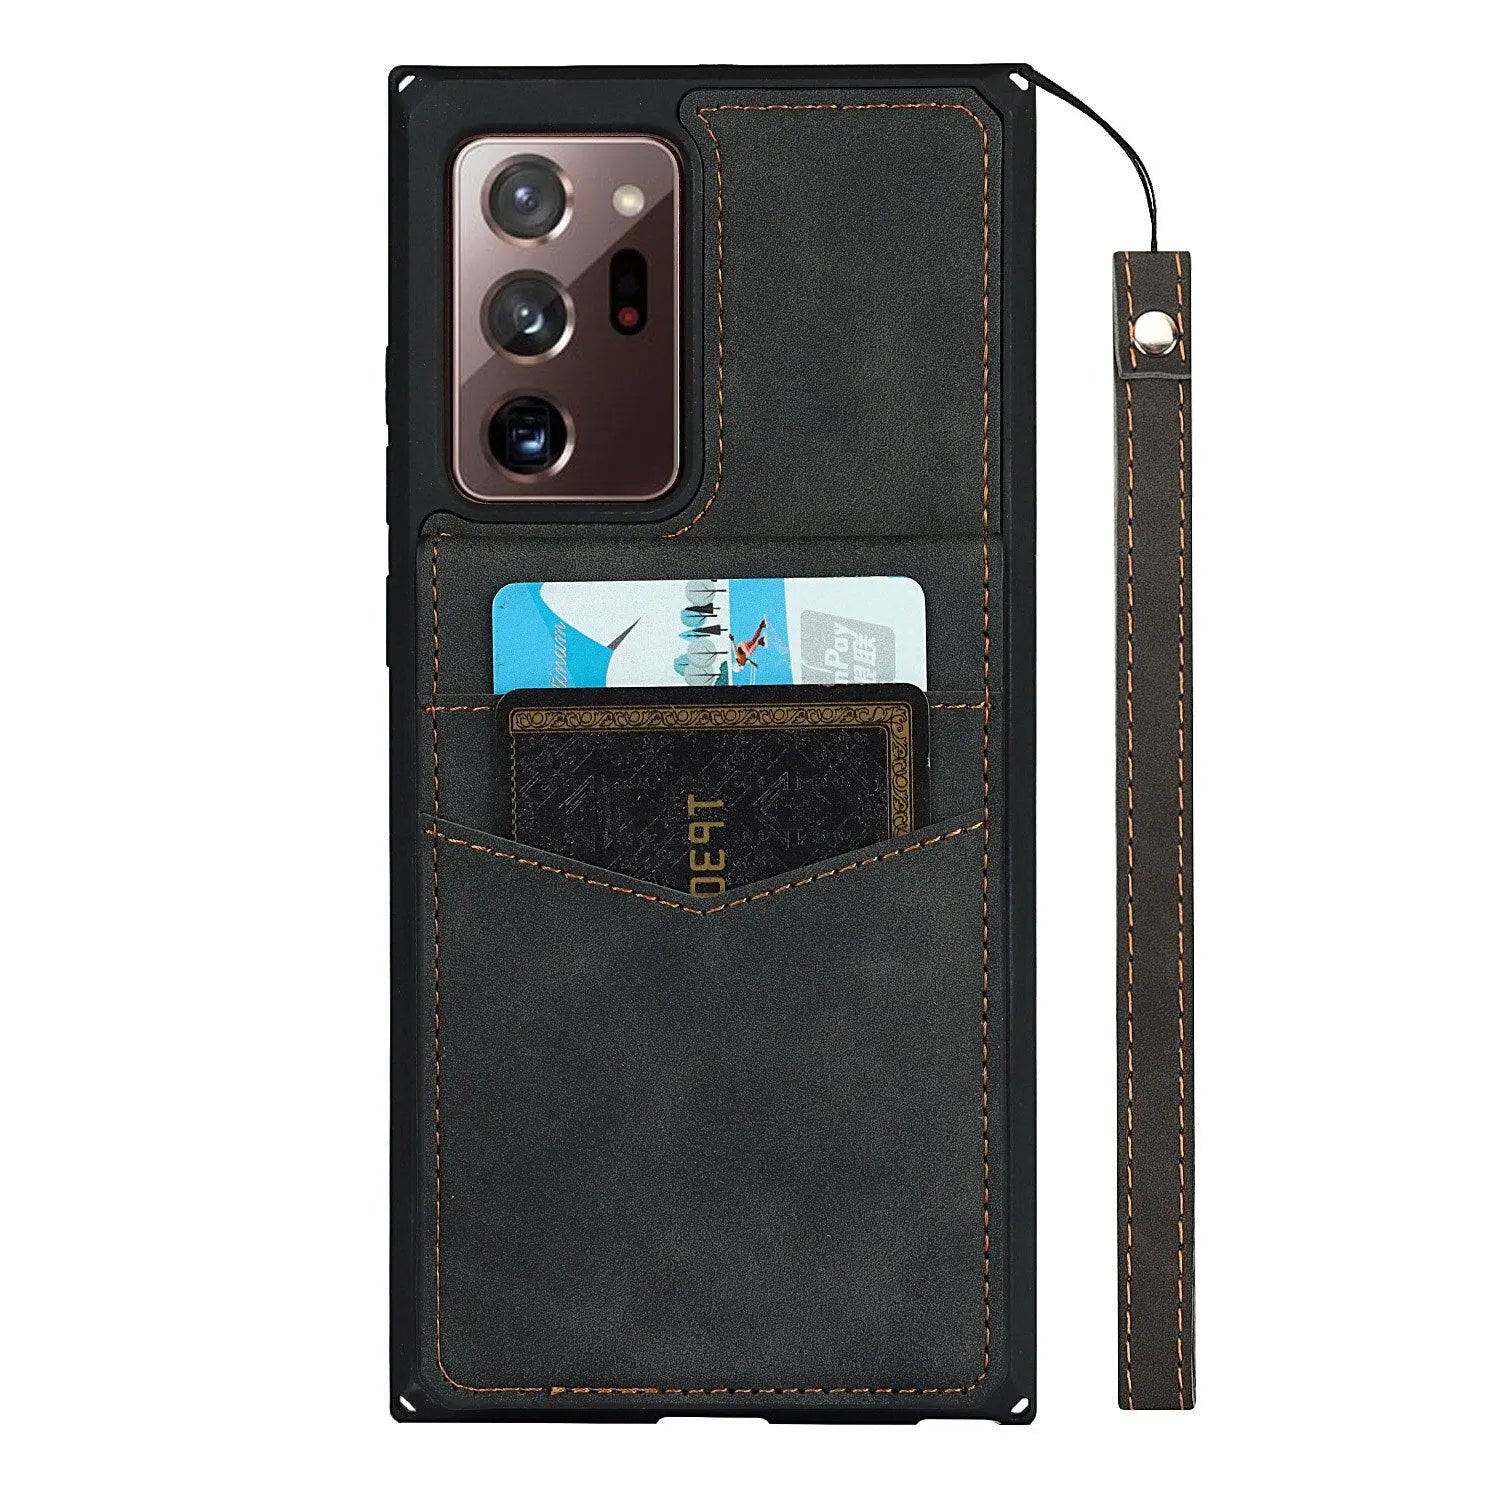 Pristine Leather Flip Case For Samsung Galaxy Phone - Pinnacle Luxuries